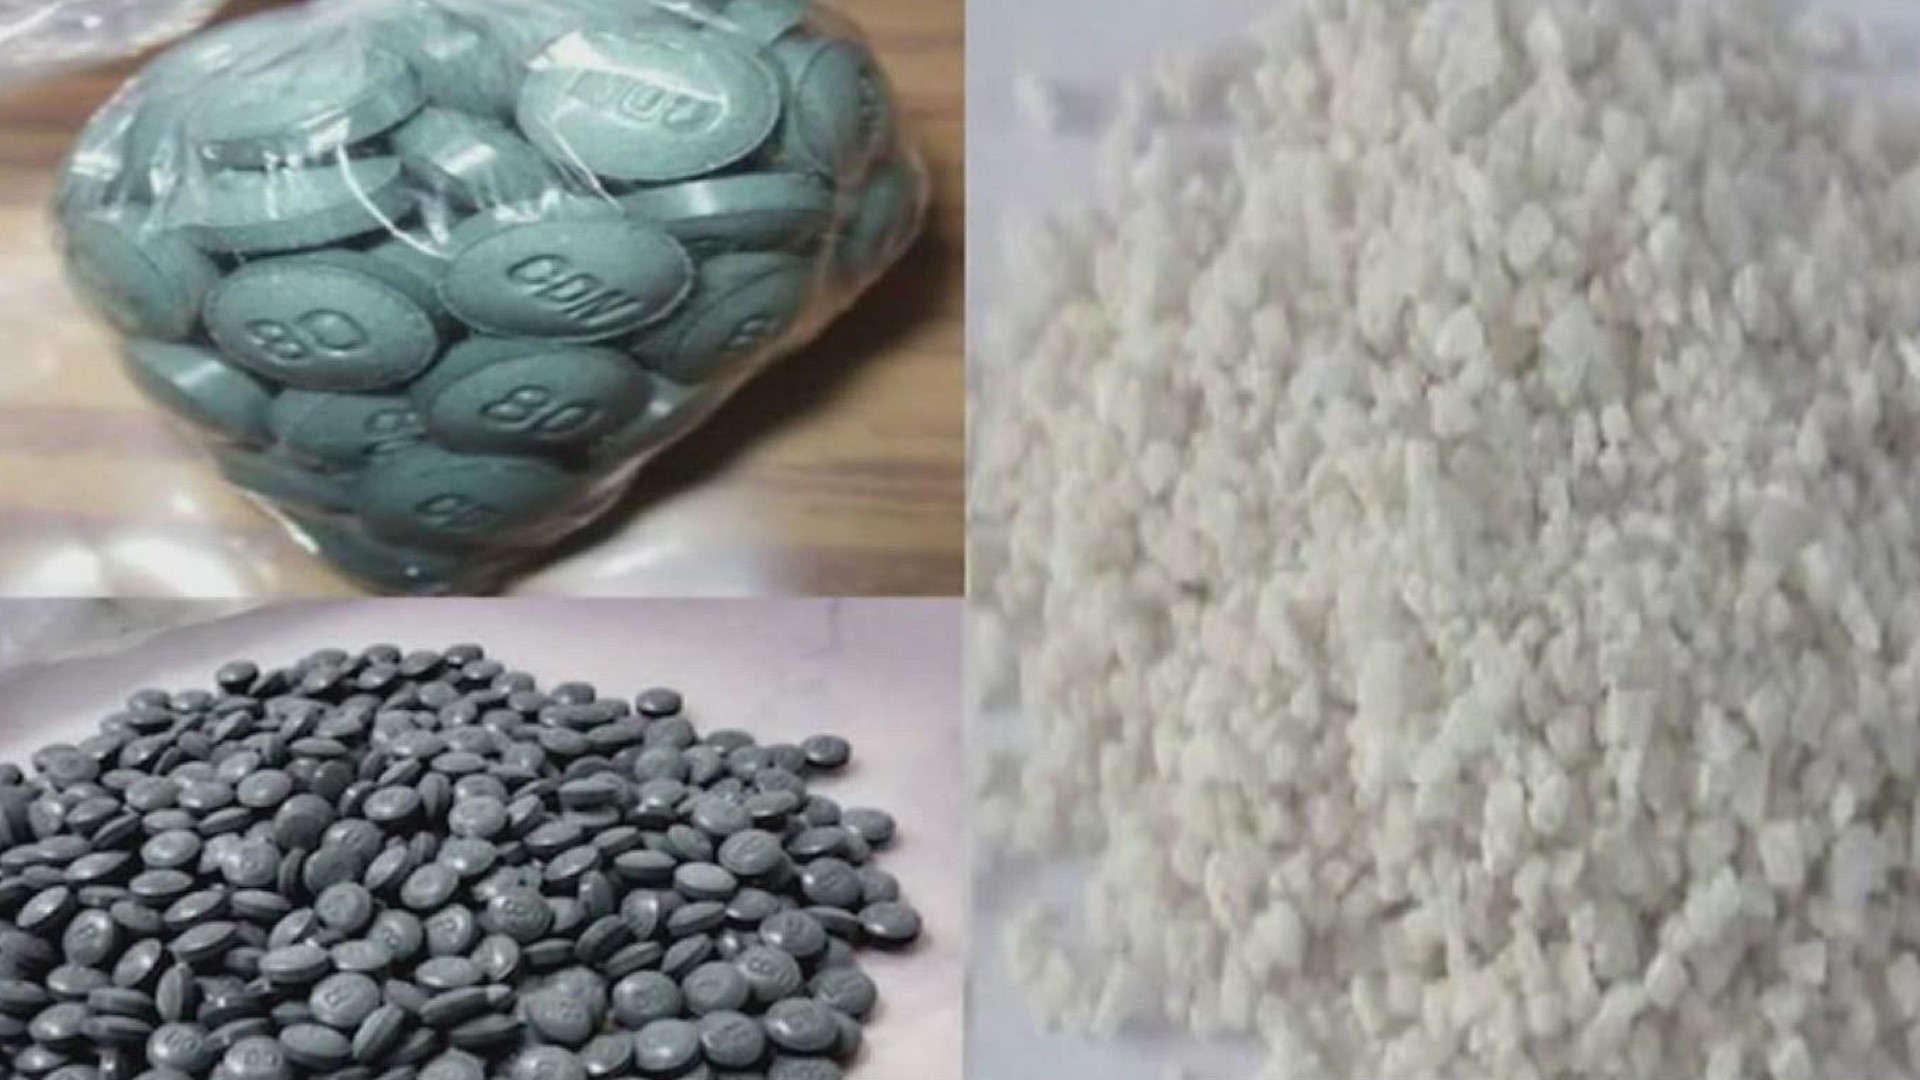 It's a synthetic opioid that medical experts say is killing Texans at an alarming rate.